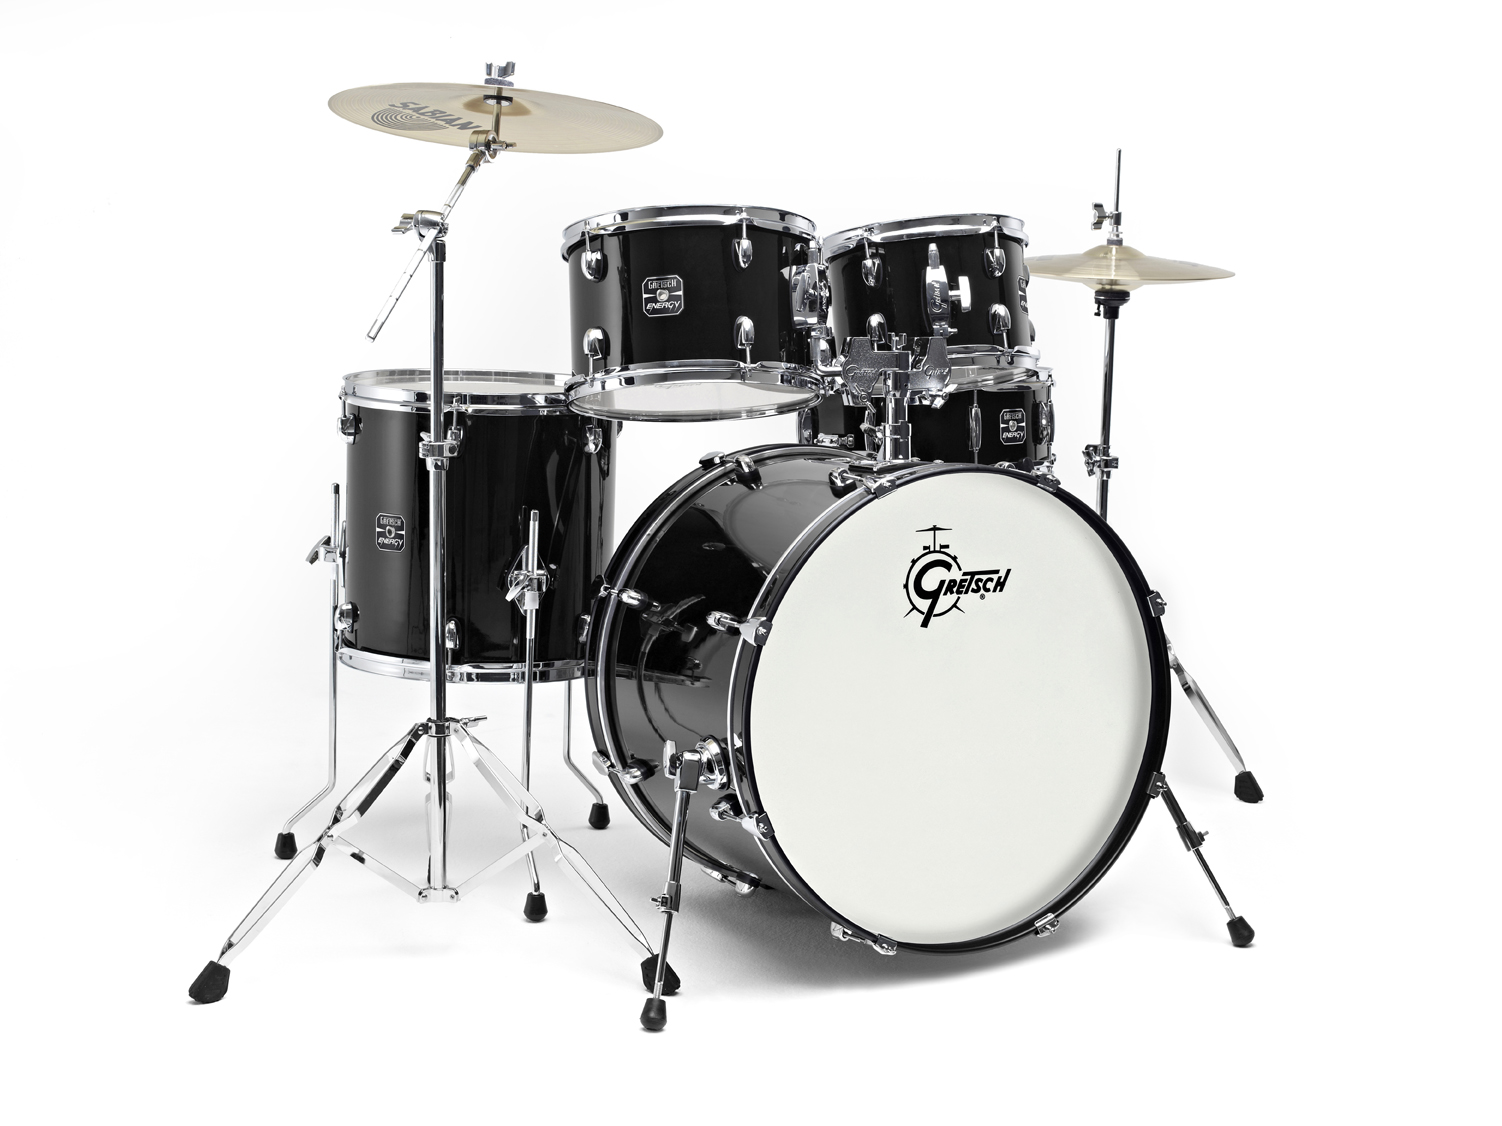 GRETSCH DRUMS NEW ENERGY FUSION 20 BLACK + PAISTE 101